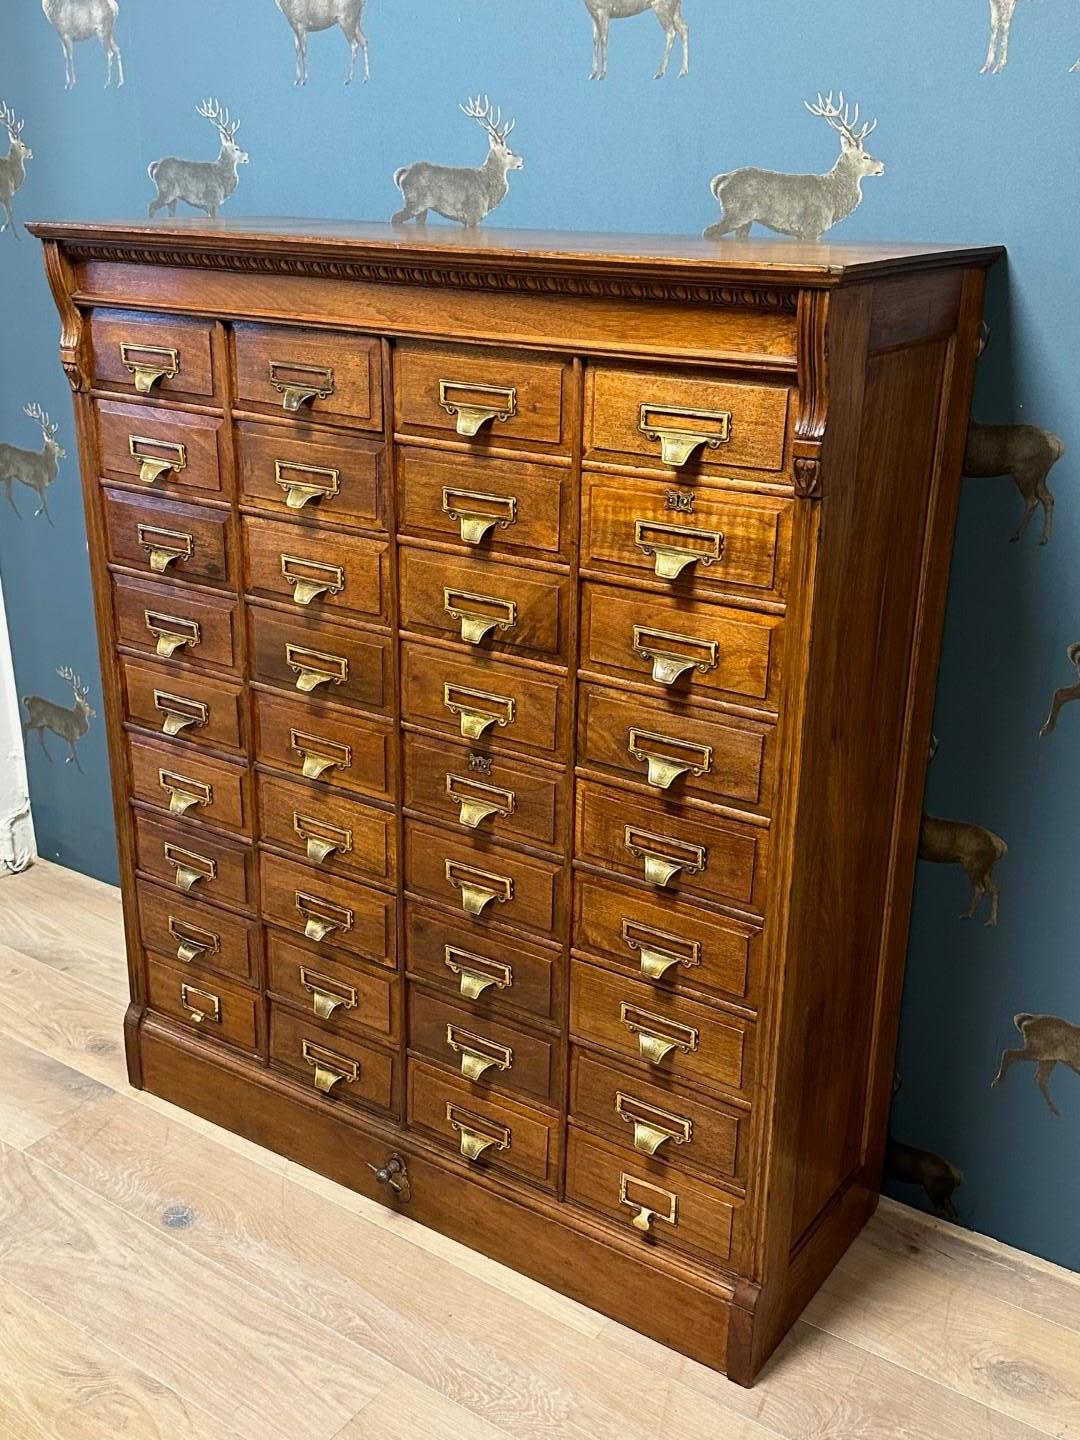 Antique walnut filing cabinet from the well-known company Shannon from the US. They also had a European branch in London. This is a filing cabinet with 36 drawers and lockable with a central latch (bottom center), key not present. The drawer pulls